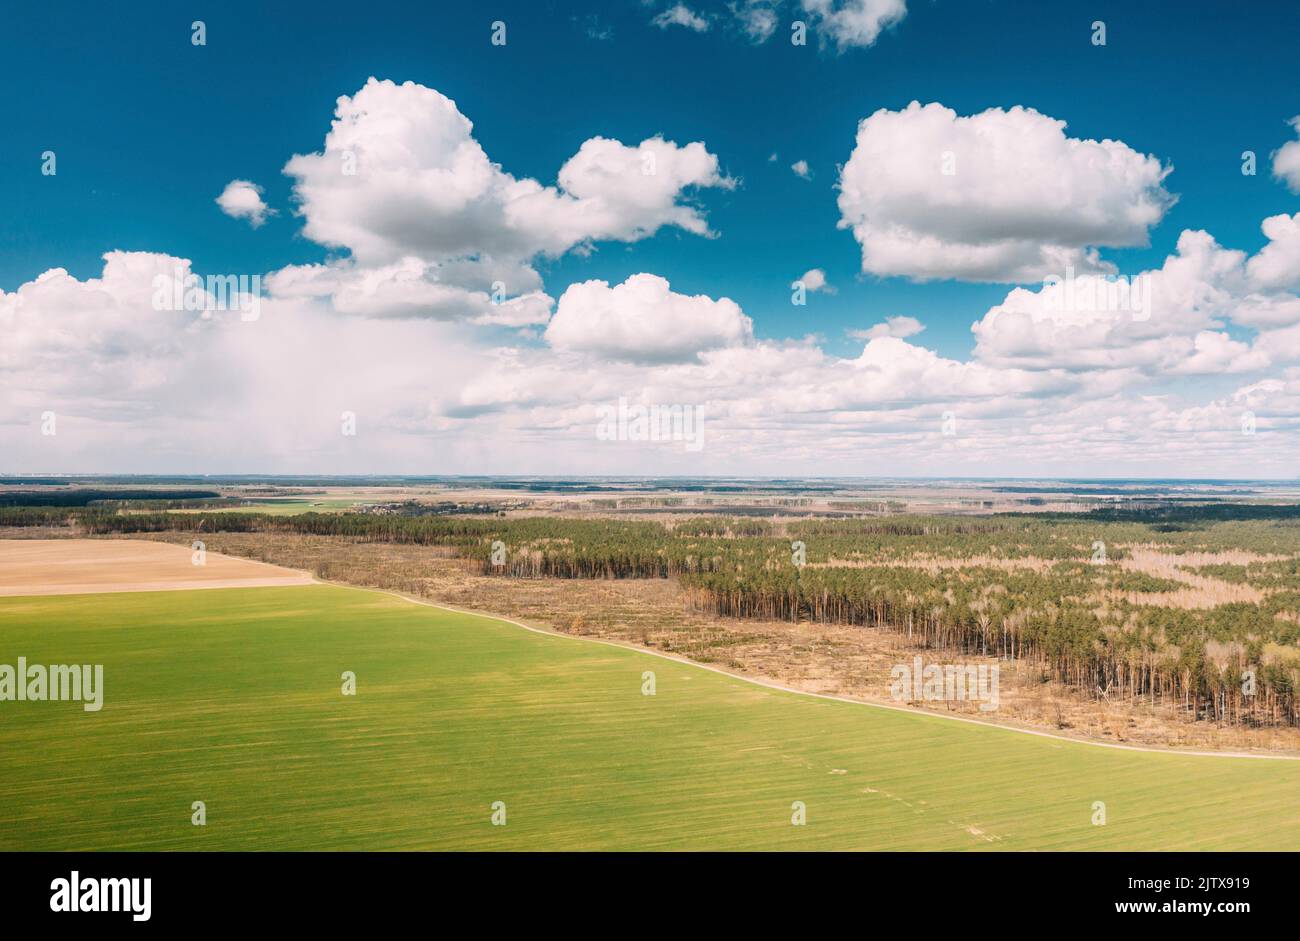 Countryside rural field landscape under scenic spring sky with white fluffy clouds. Agricultural landscape green field in spring season. Aerial view Stock Photo